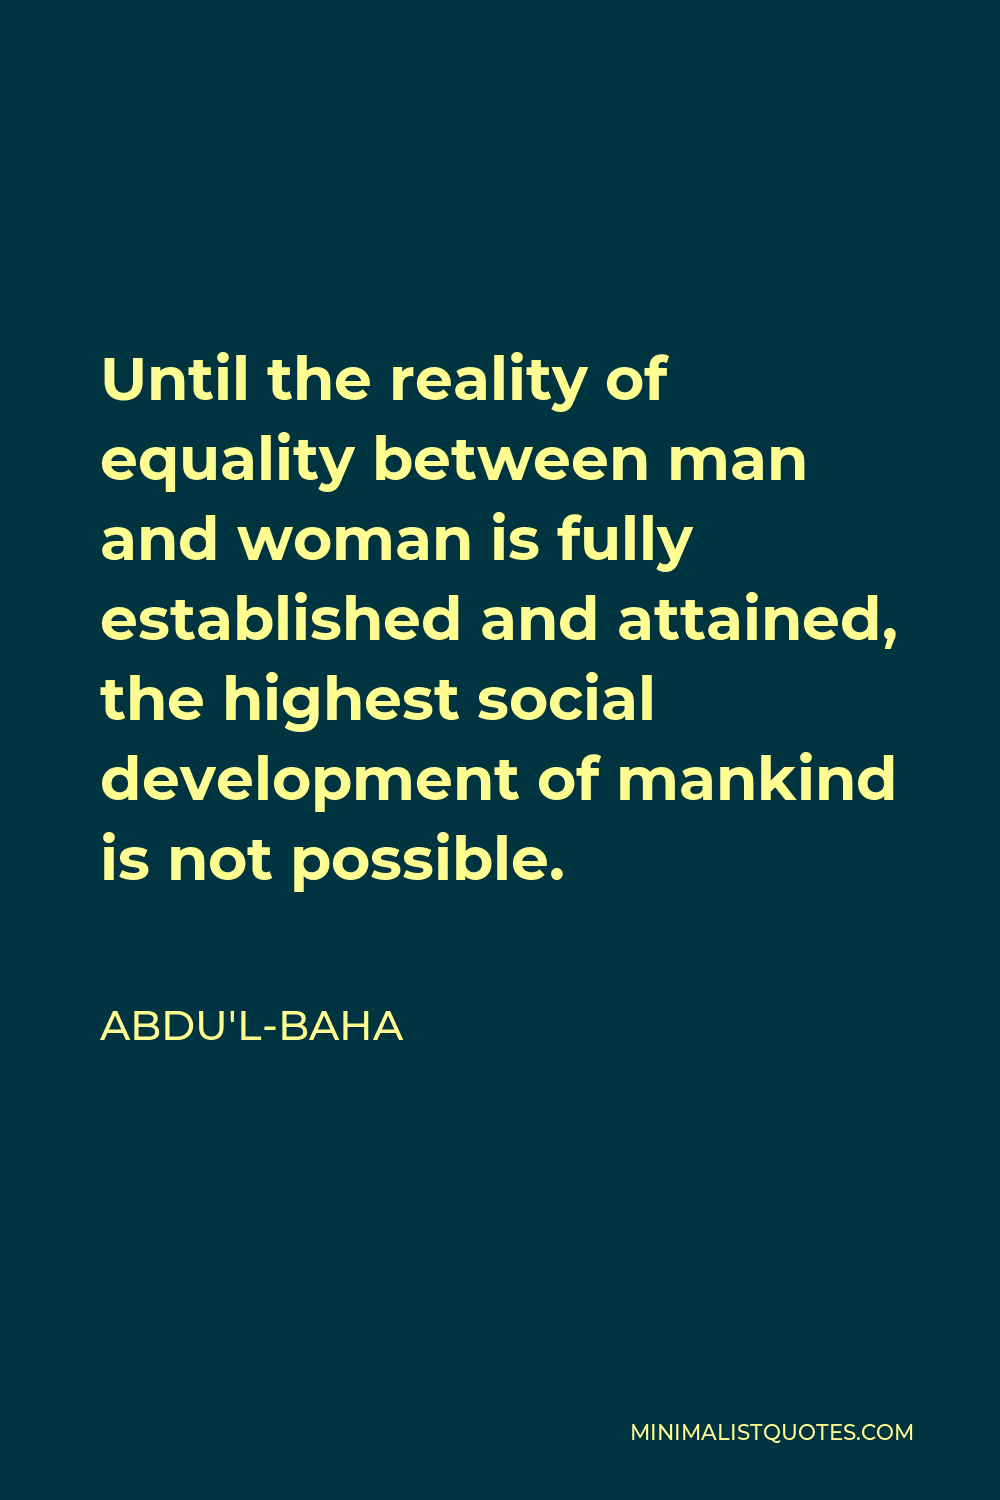 Abdu'l-Baha Quote - Until the reality of equality between man and woman is fully established and attained, the highest social development of mankind is not possible.